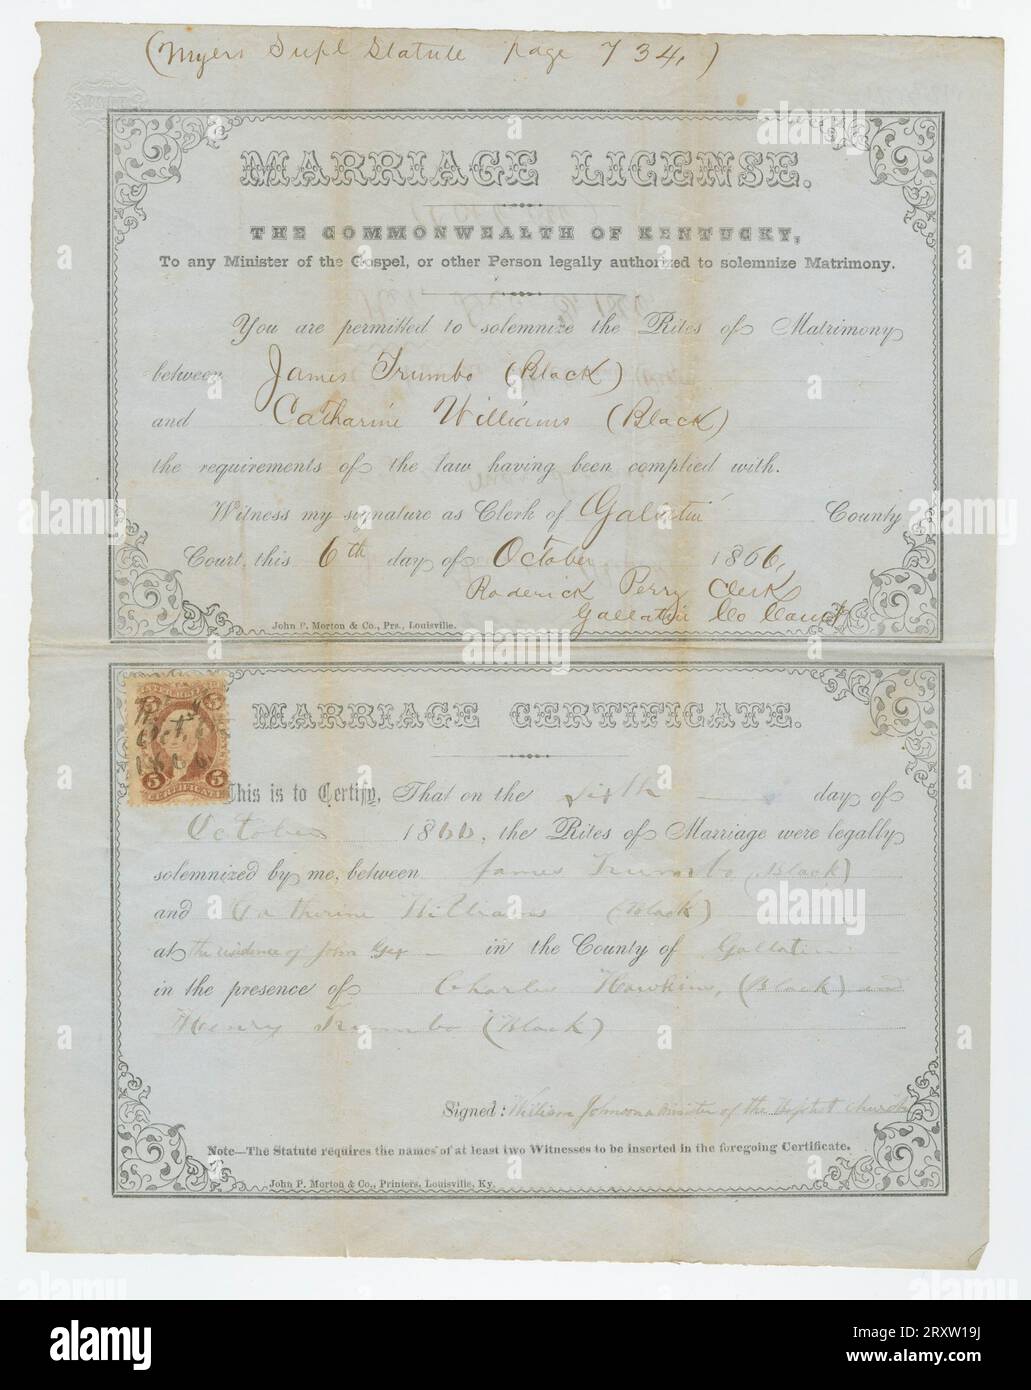 Partially printed marriage license and certificate for James Trumbo and Catherine Williams, accomplished by hand, with a five cent United States revenue stamp attached. It is signed at the bottom by William Johnson, 'minister of the Baptist Church'. Trumbo and Williams were married on October 6, 1866 in the Commonwealth of Kentucky. Stock Photo